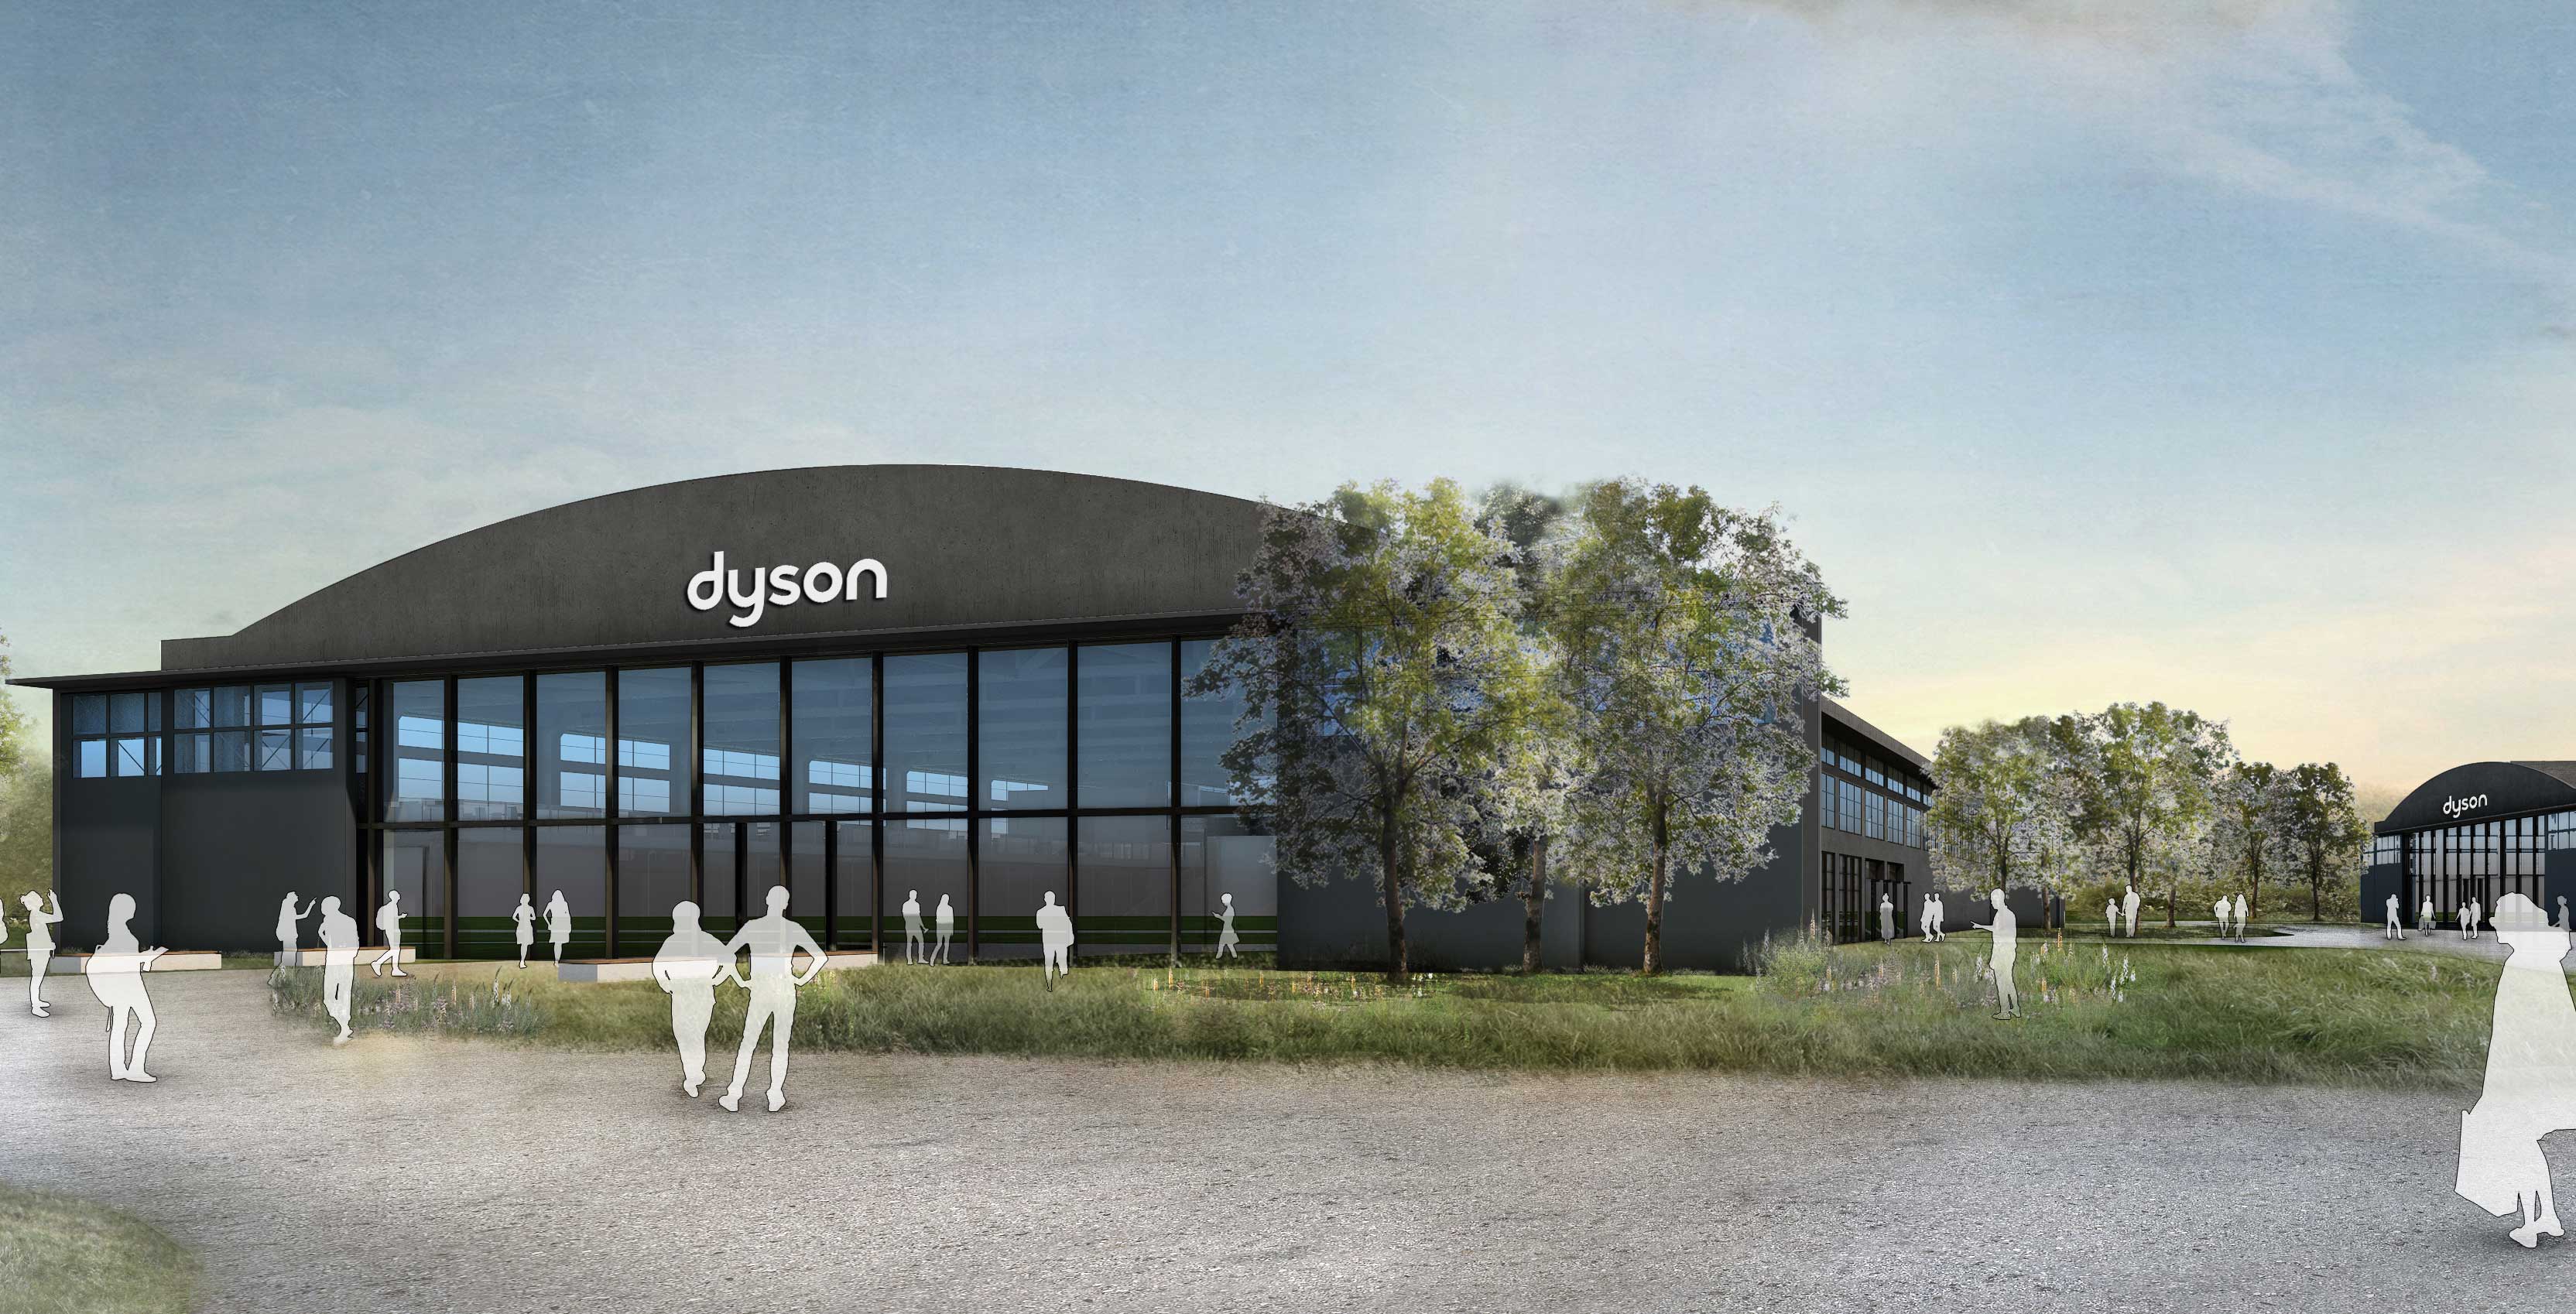 An image of the Dyson headquarters